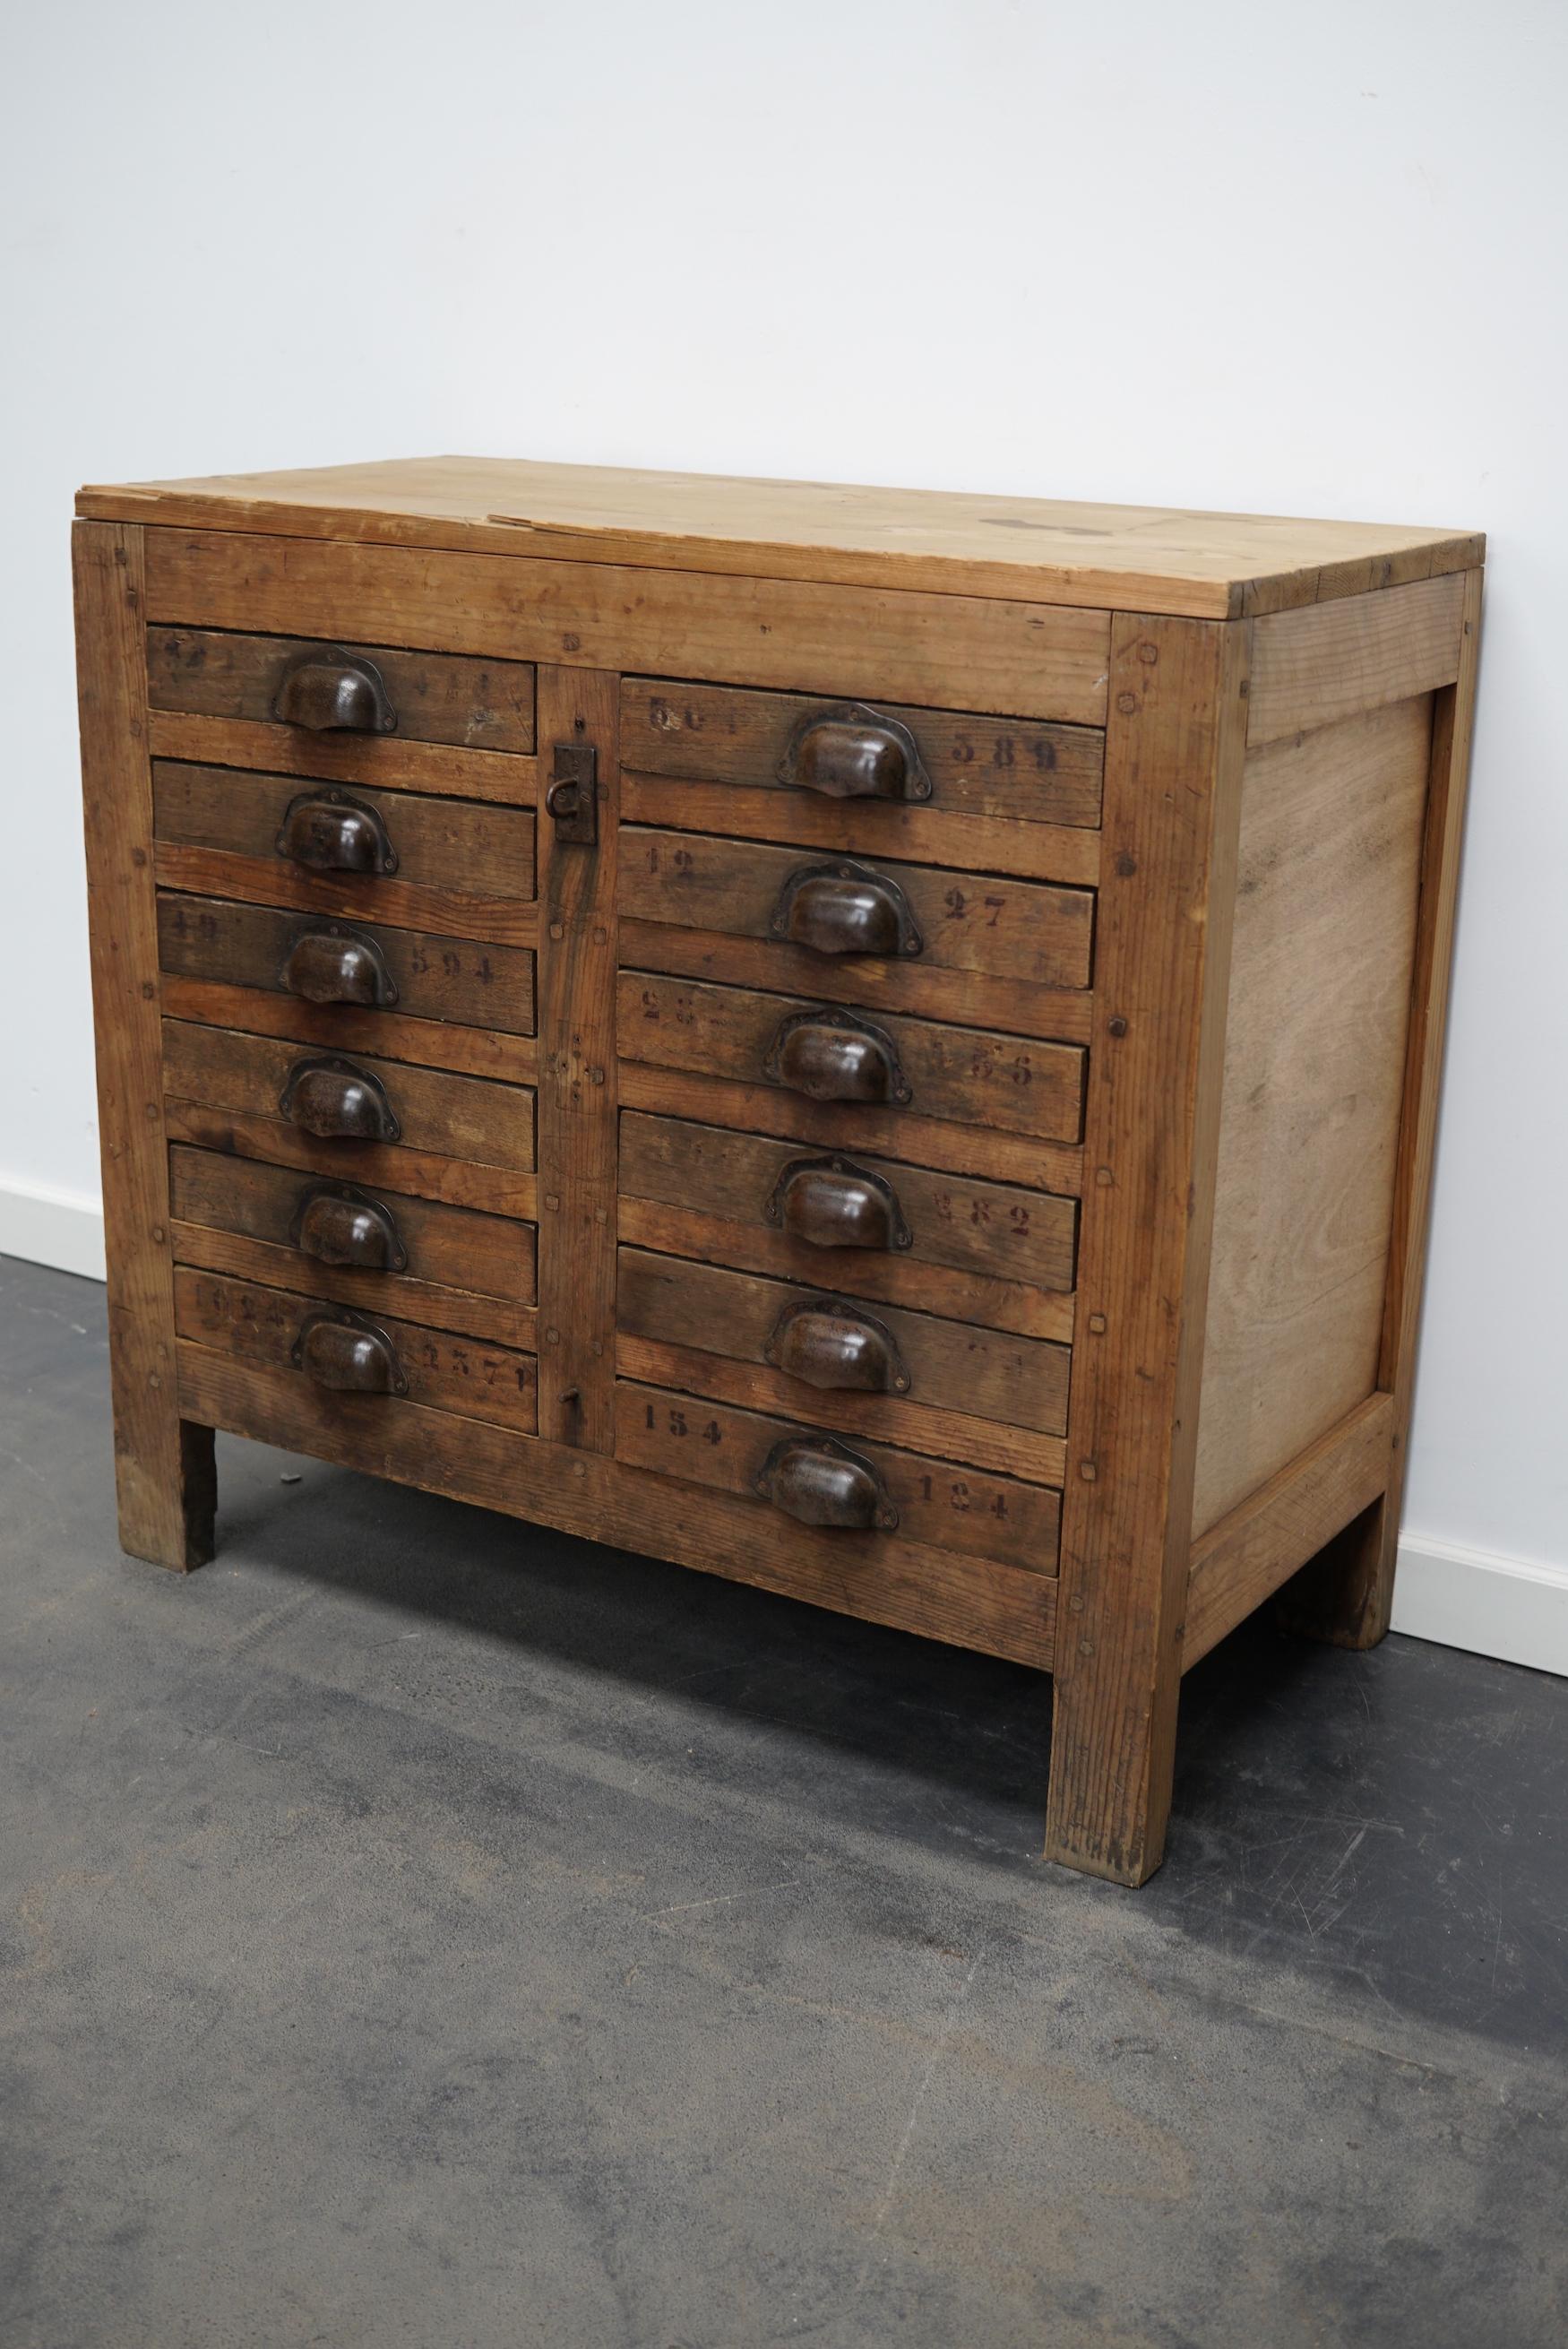 This workshop cabinet was made from pine in France circa mid to early 20th century. It features 12 drawers with metal cup handles. All the drawers have dividers. The interior dimensions of the drawers are: DWH 32 x 25 x 4 cm.